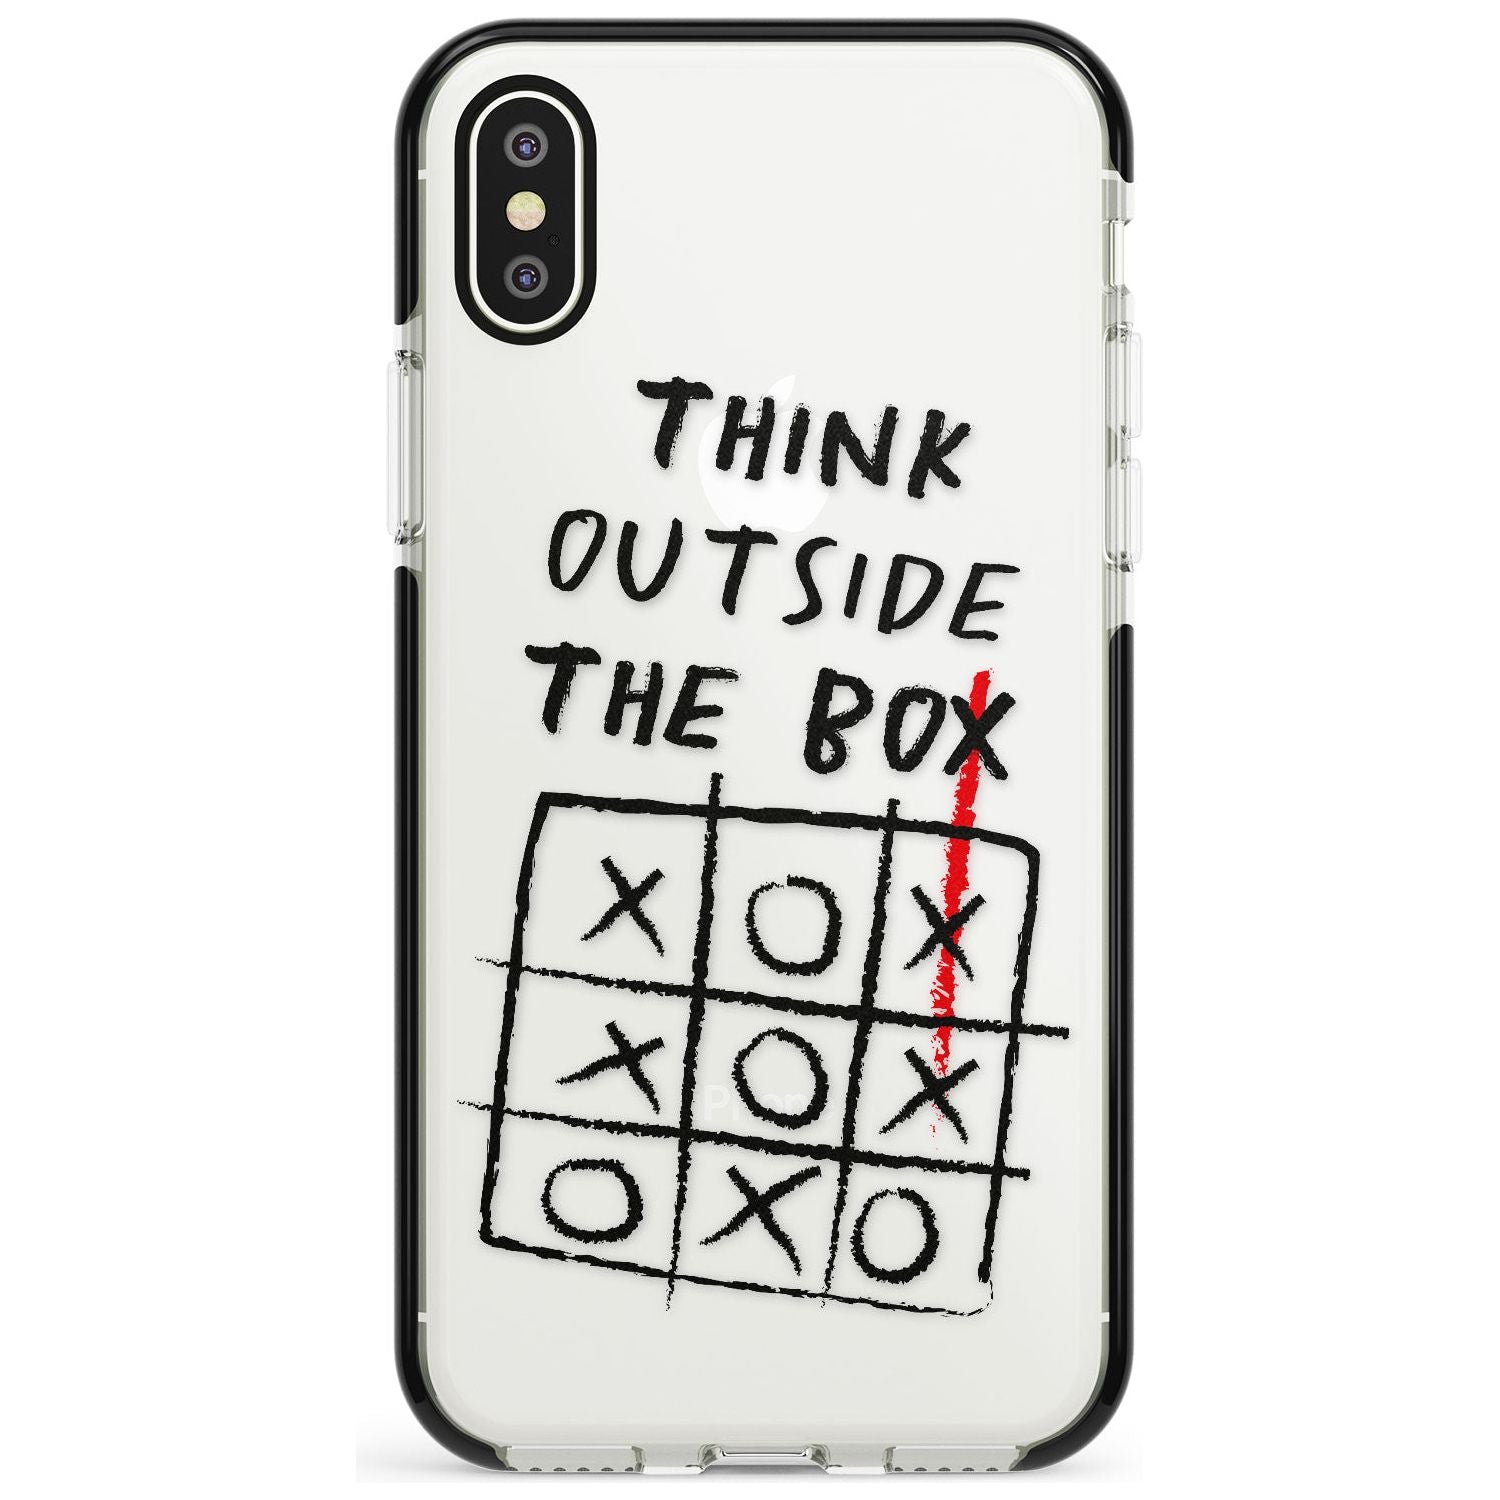 "Think Outside the Box" Black Impact Phone Case for iPhone X XS Max XR